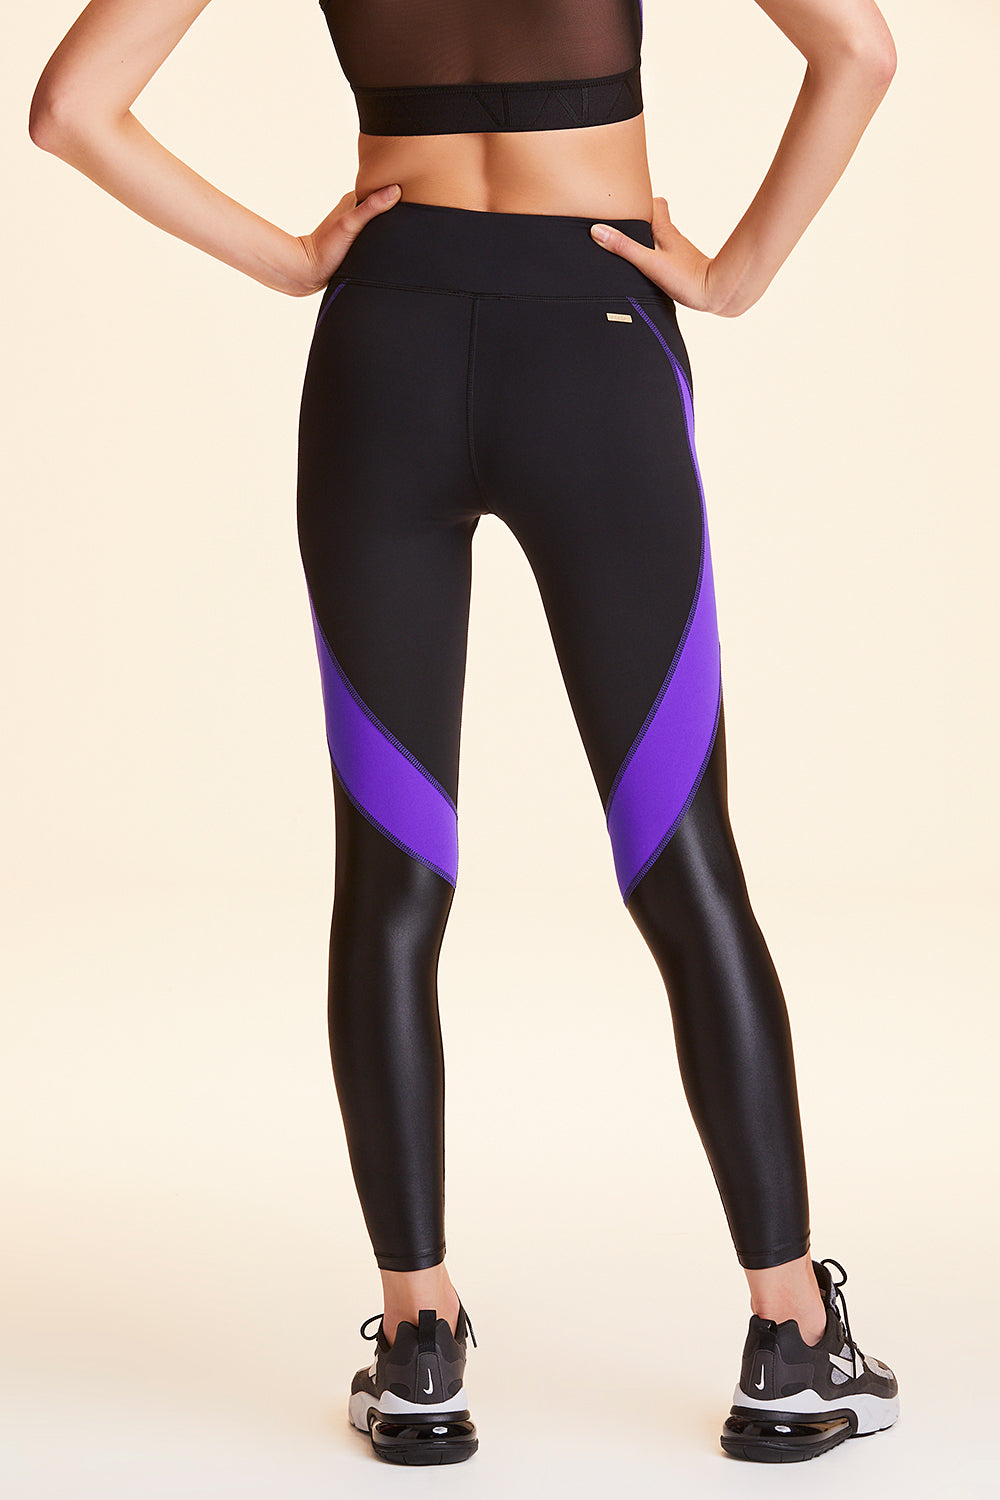 Back view of Alala Women's Luxury Athleisure black and purple color-blocked tight